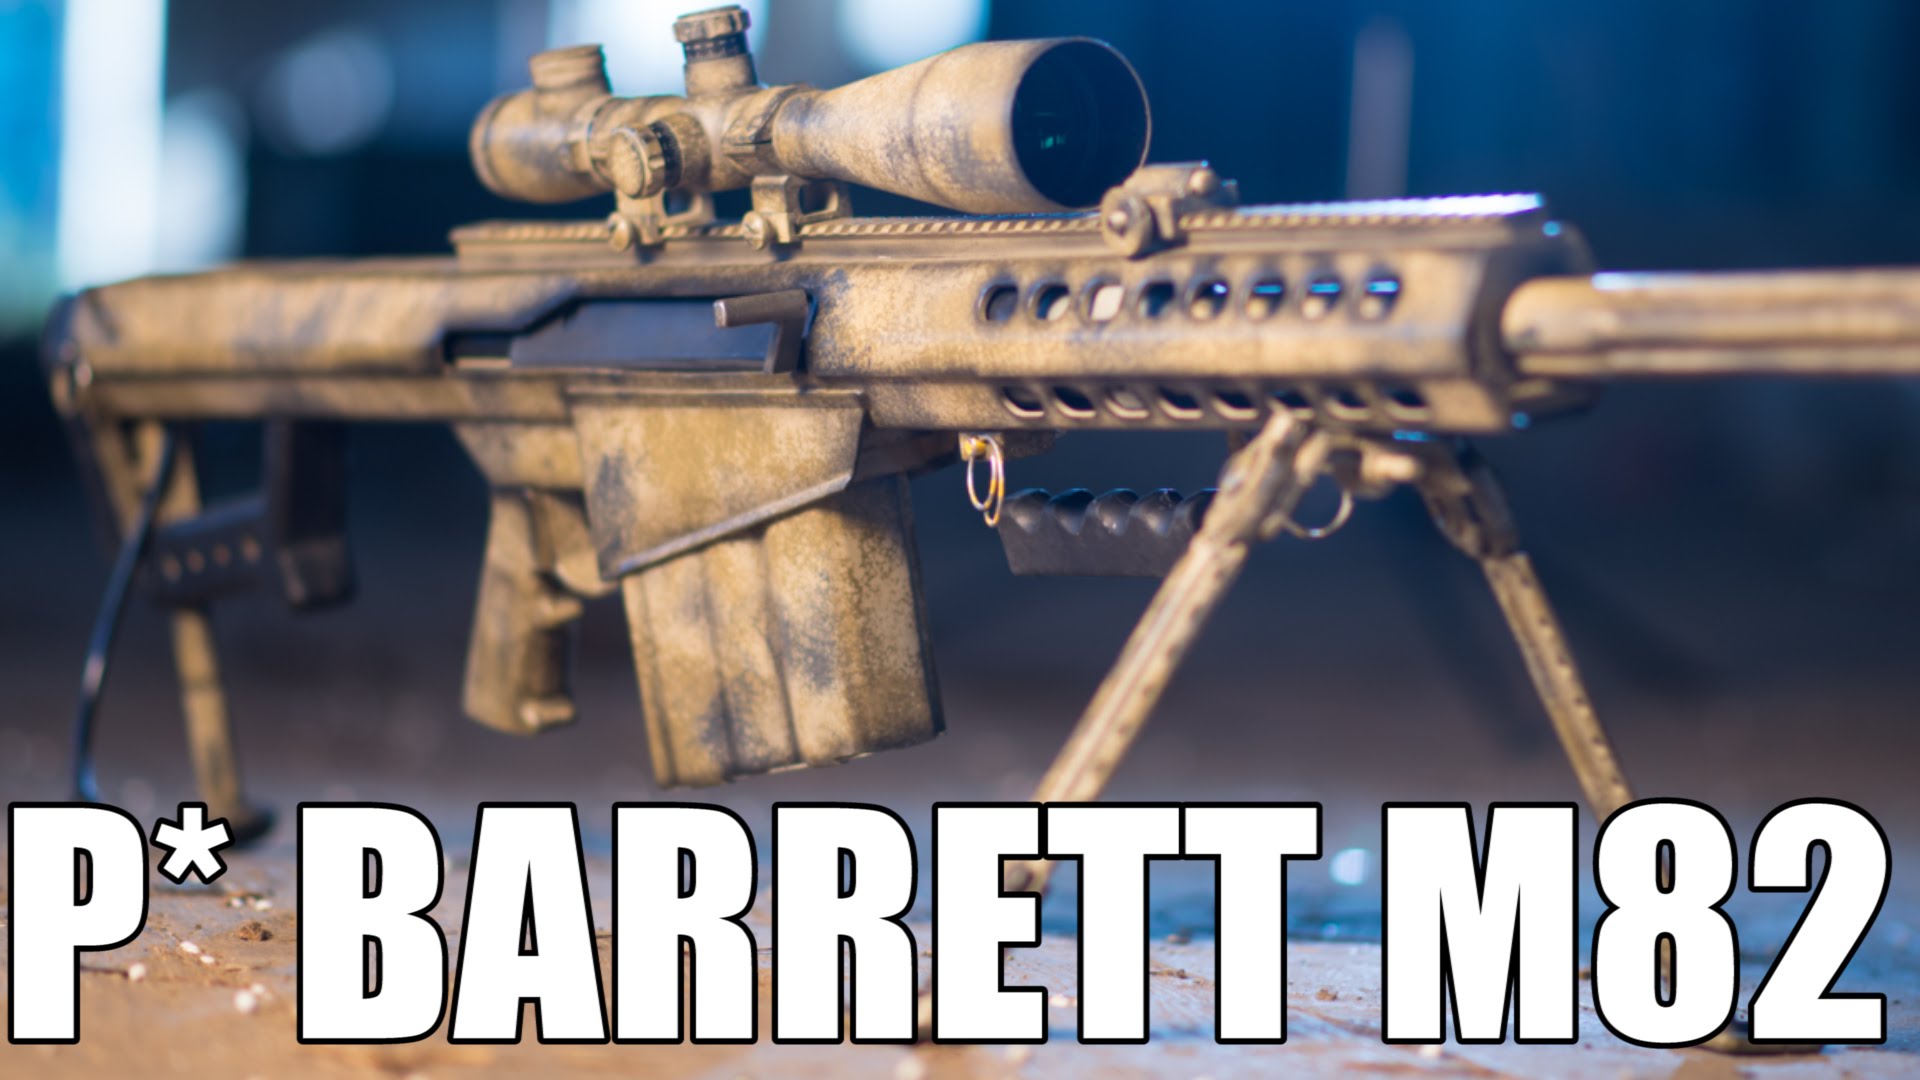 Amazing Barrett M82 Sniper Rifle Pictures & Backgrounds